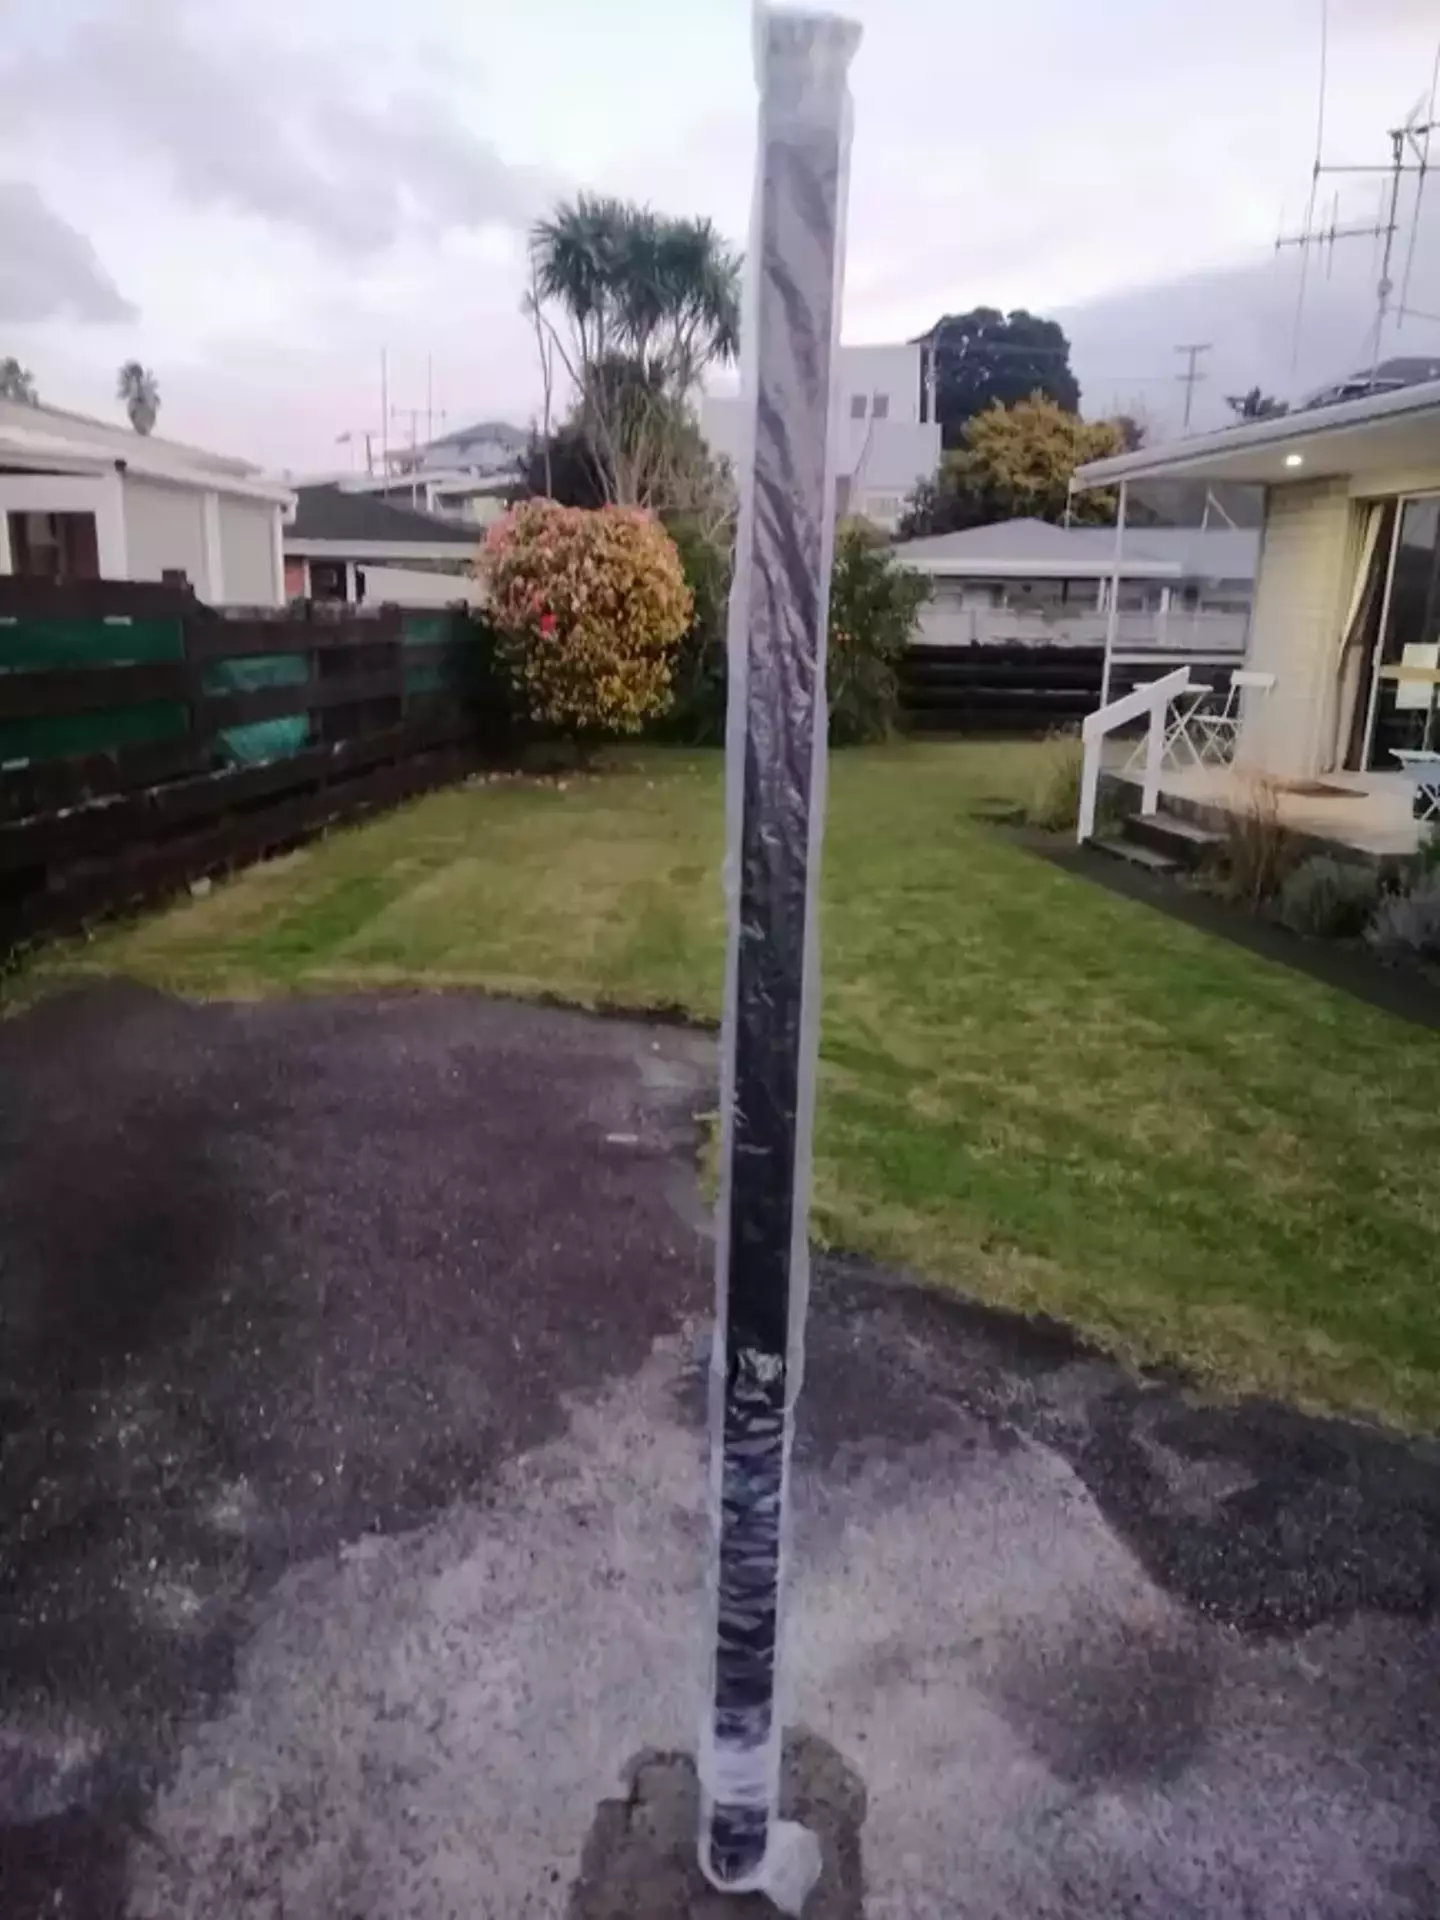 A New Zealand woman has finally discovered who is responsible for mysteriously erecting a 6ft pole in her driveway.